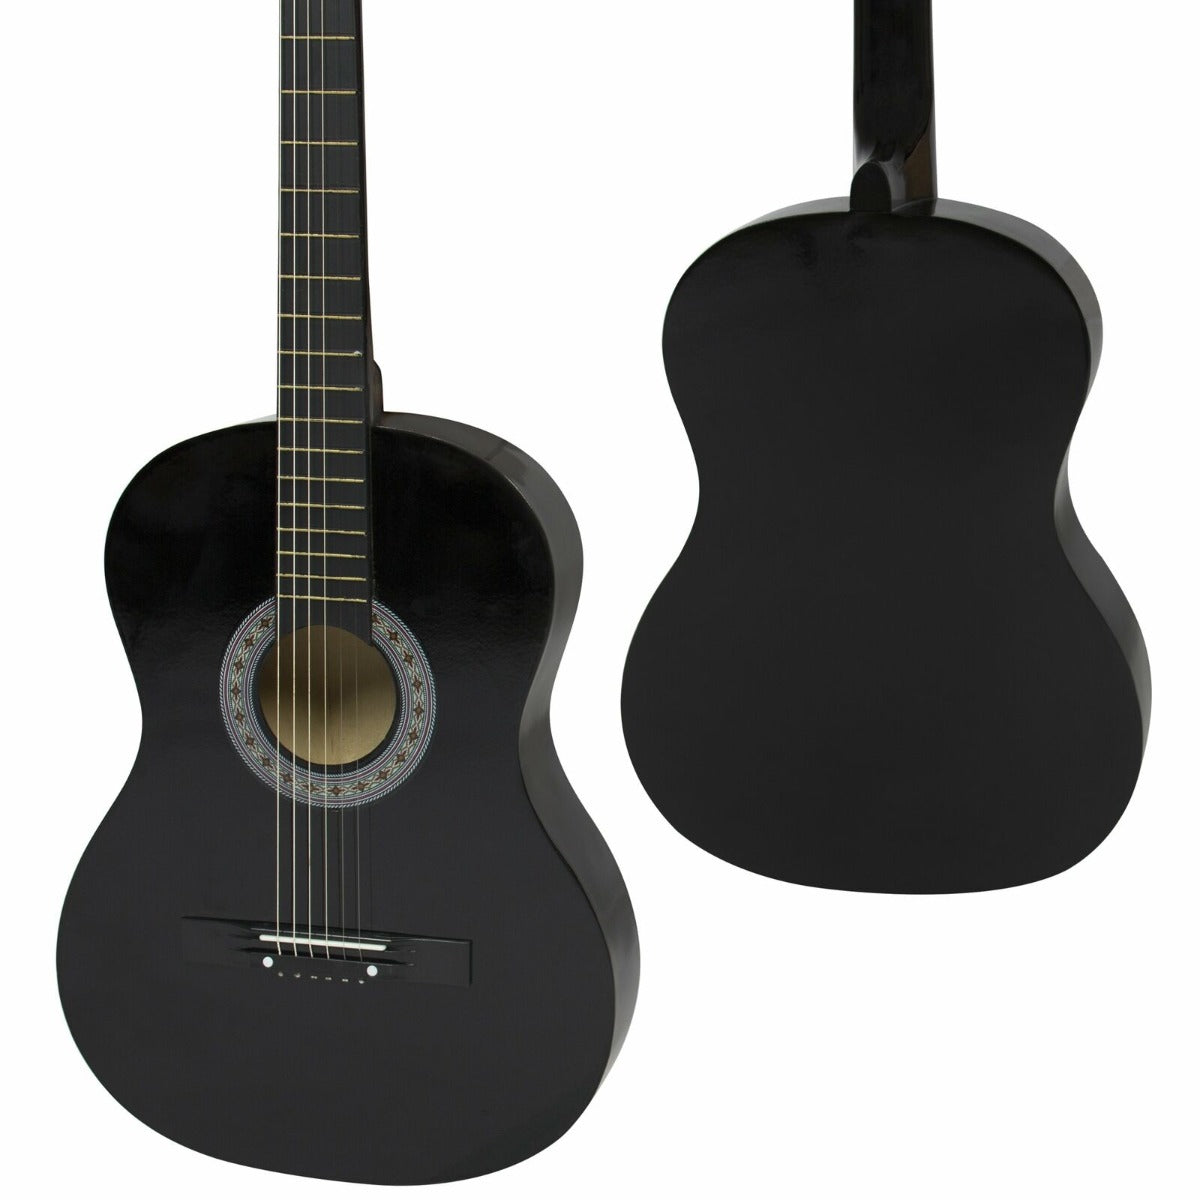 black acoustic guitar front view and back view